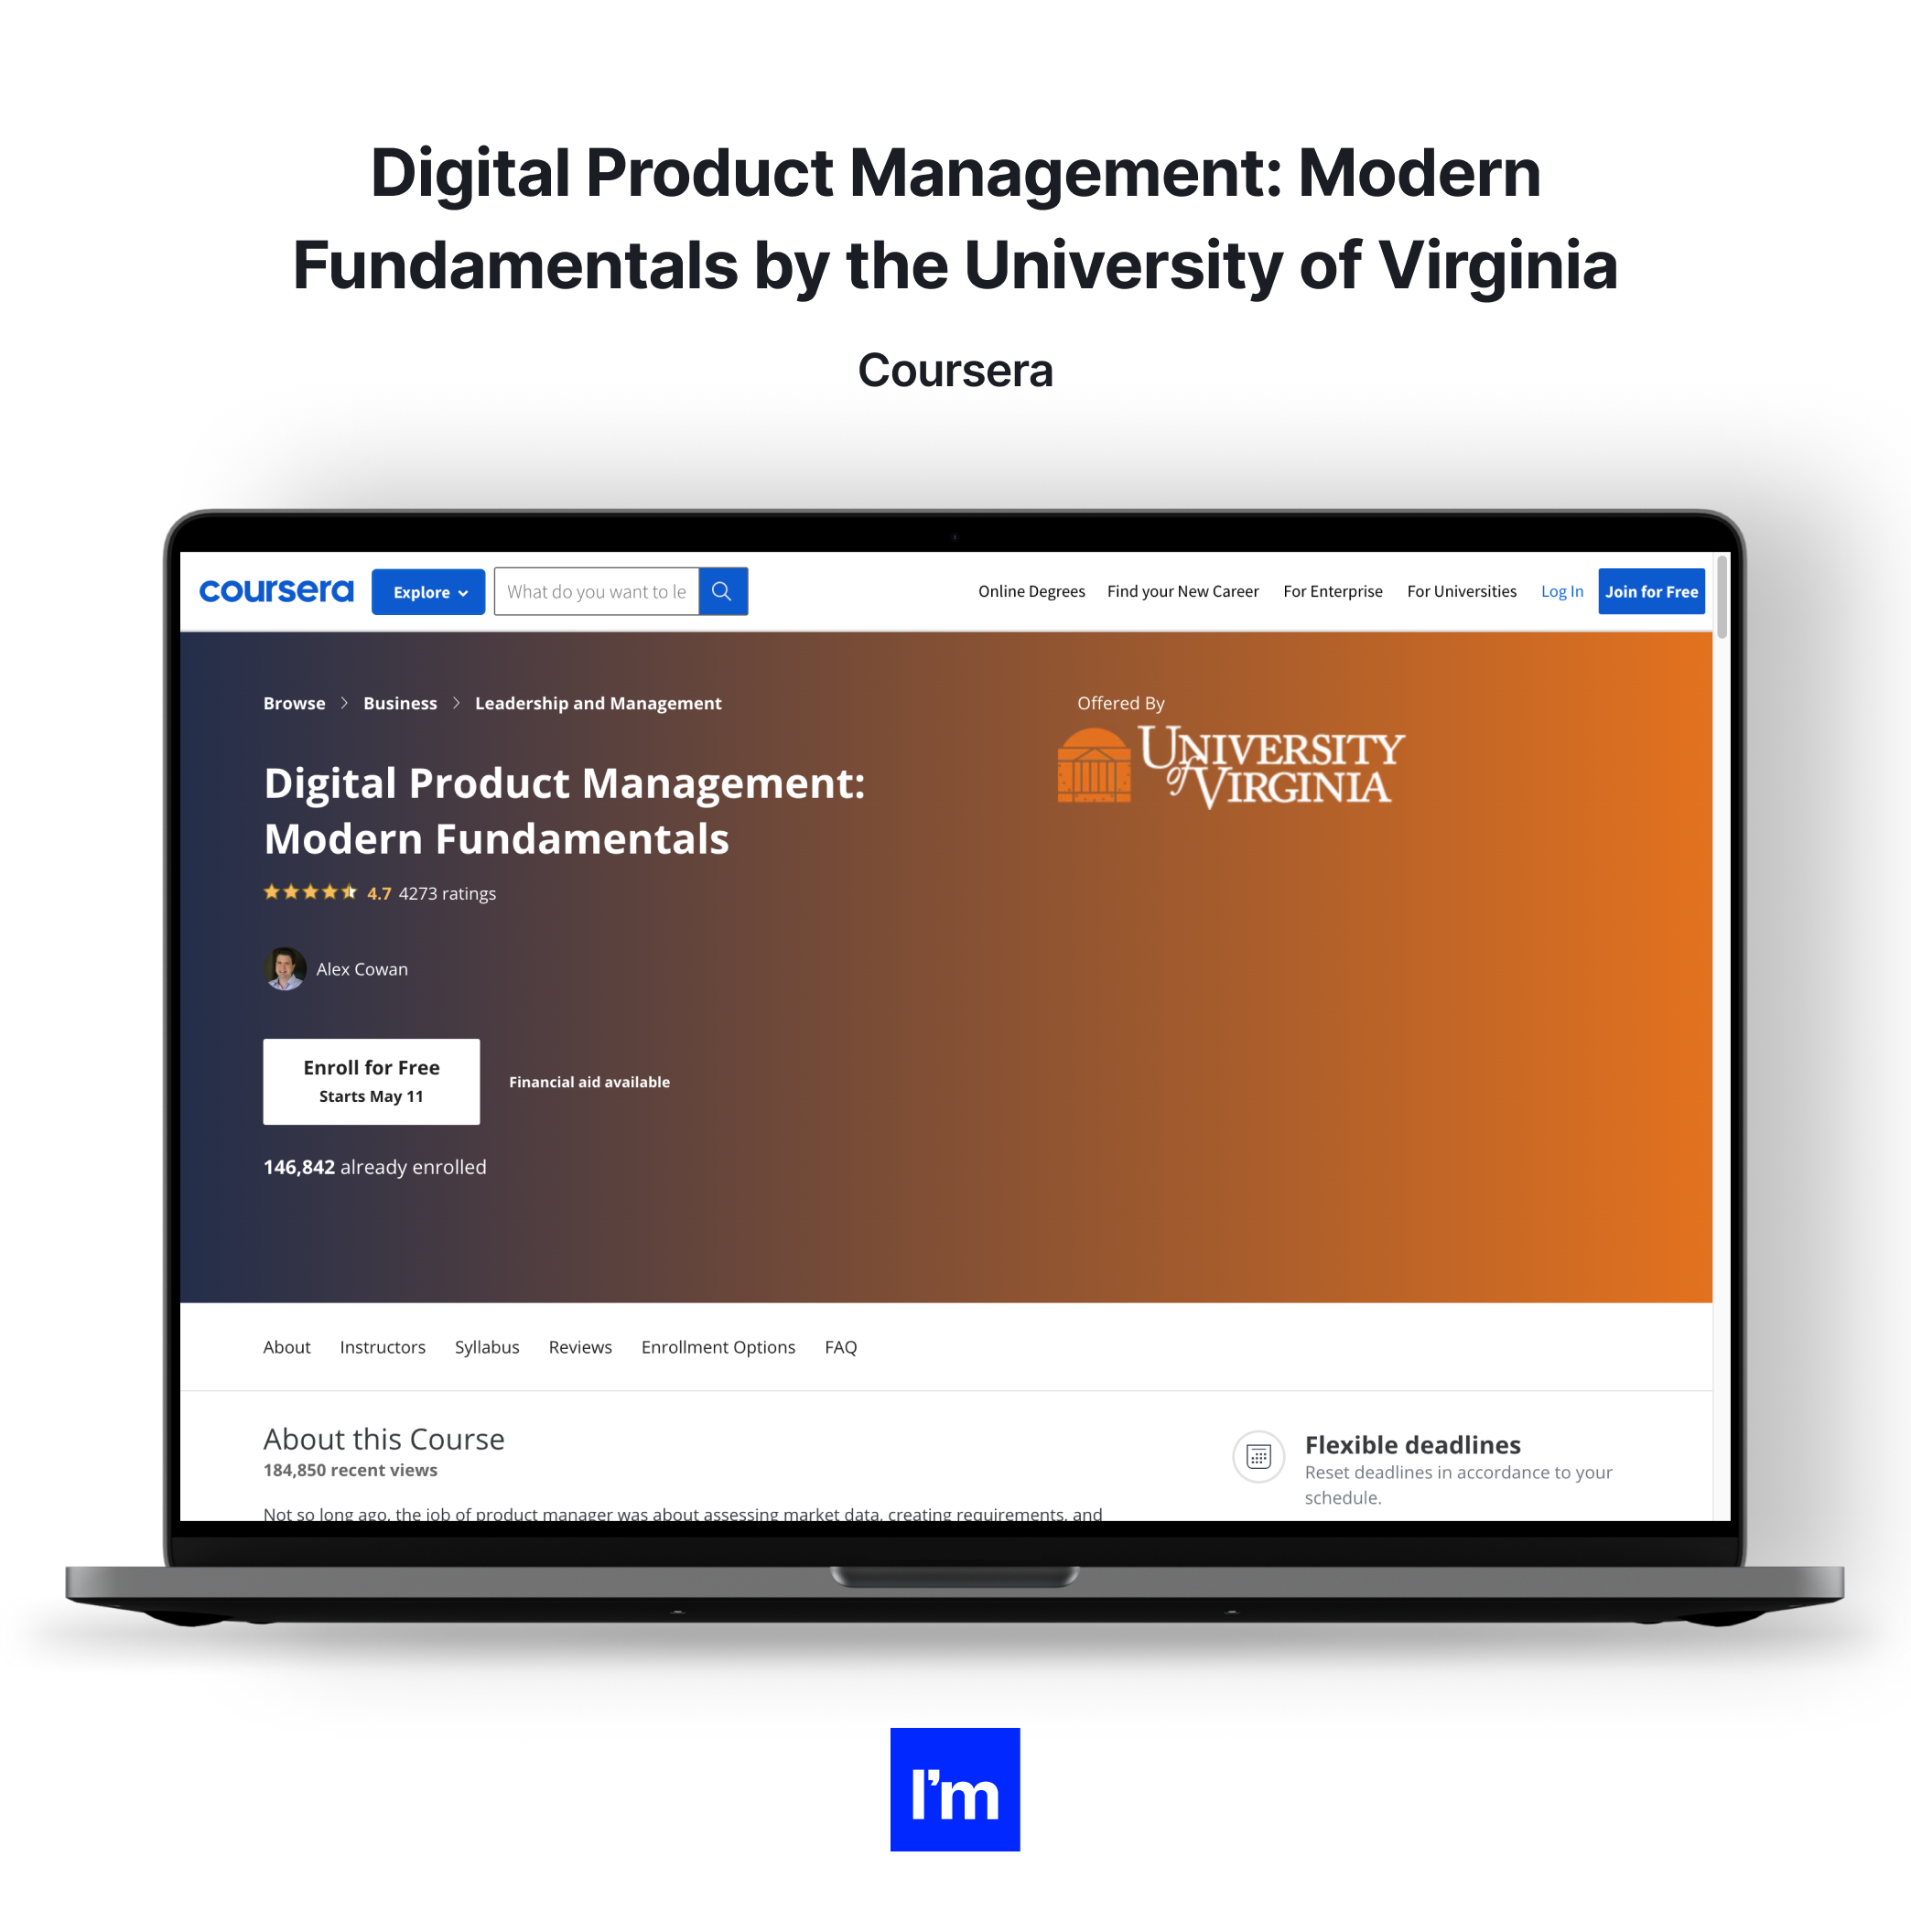 Top 10 Product Management Courses to Polish Your Skills in 2022 - Digital Product Management: Modern Fundamentals by the University of Virginia